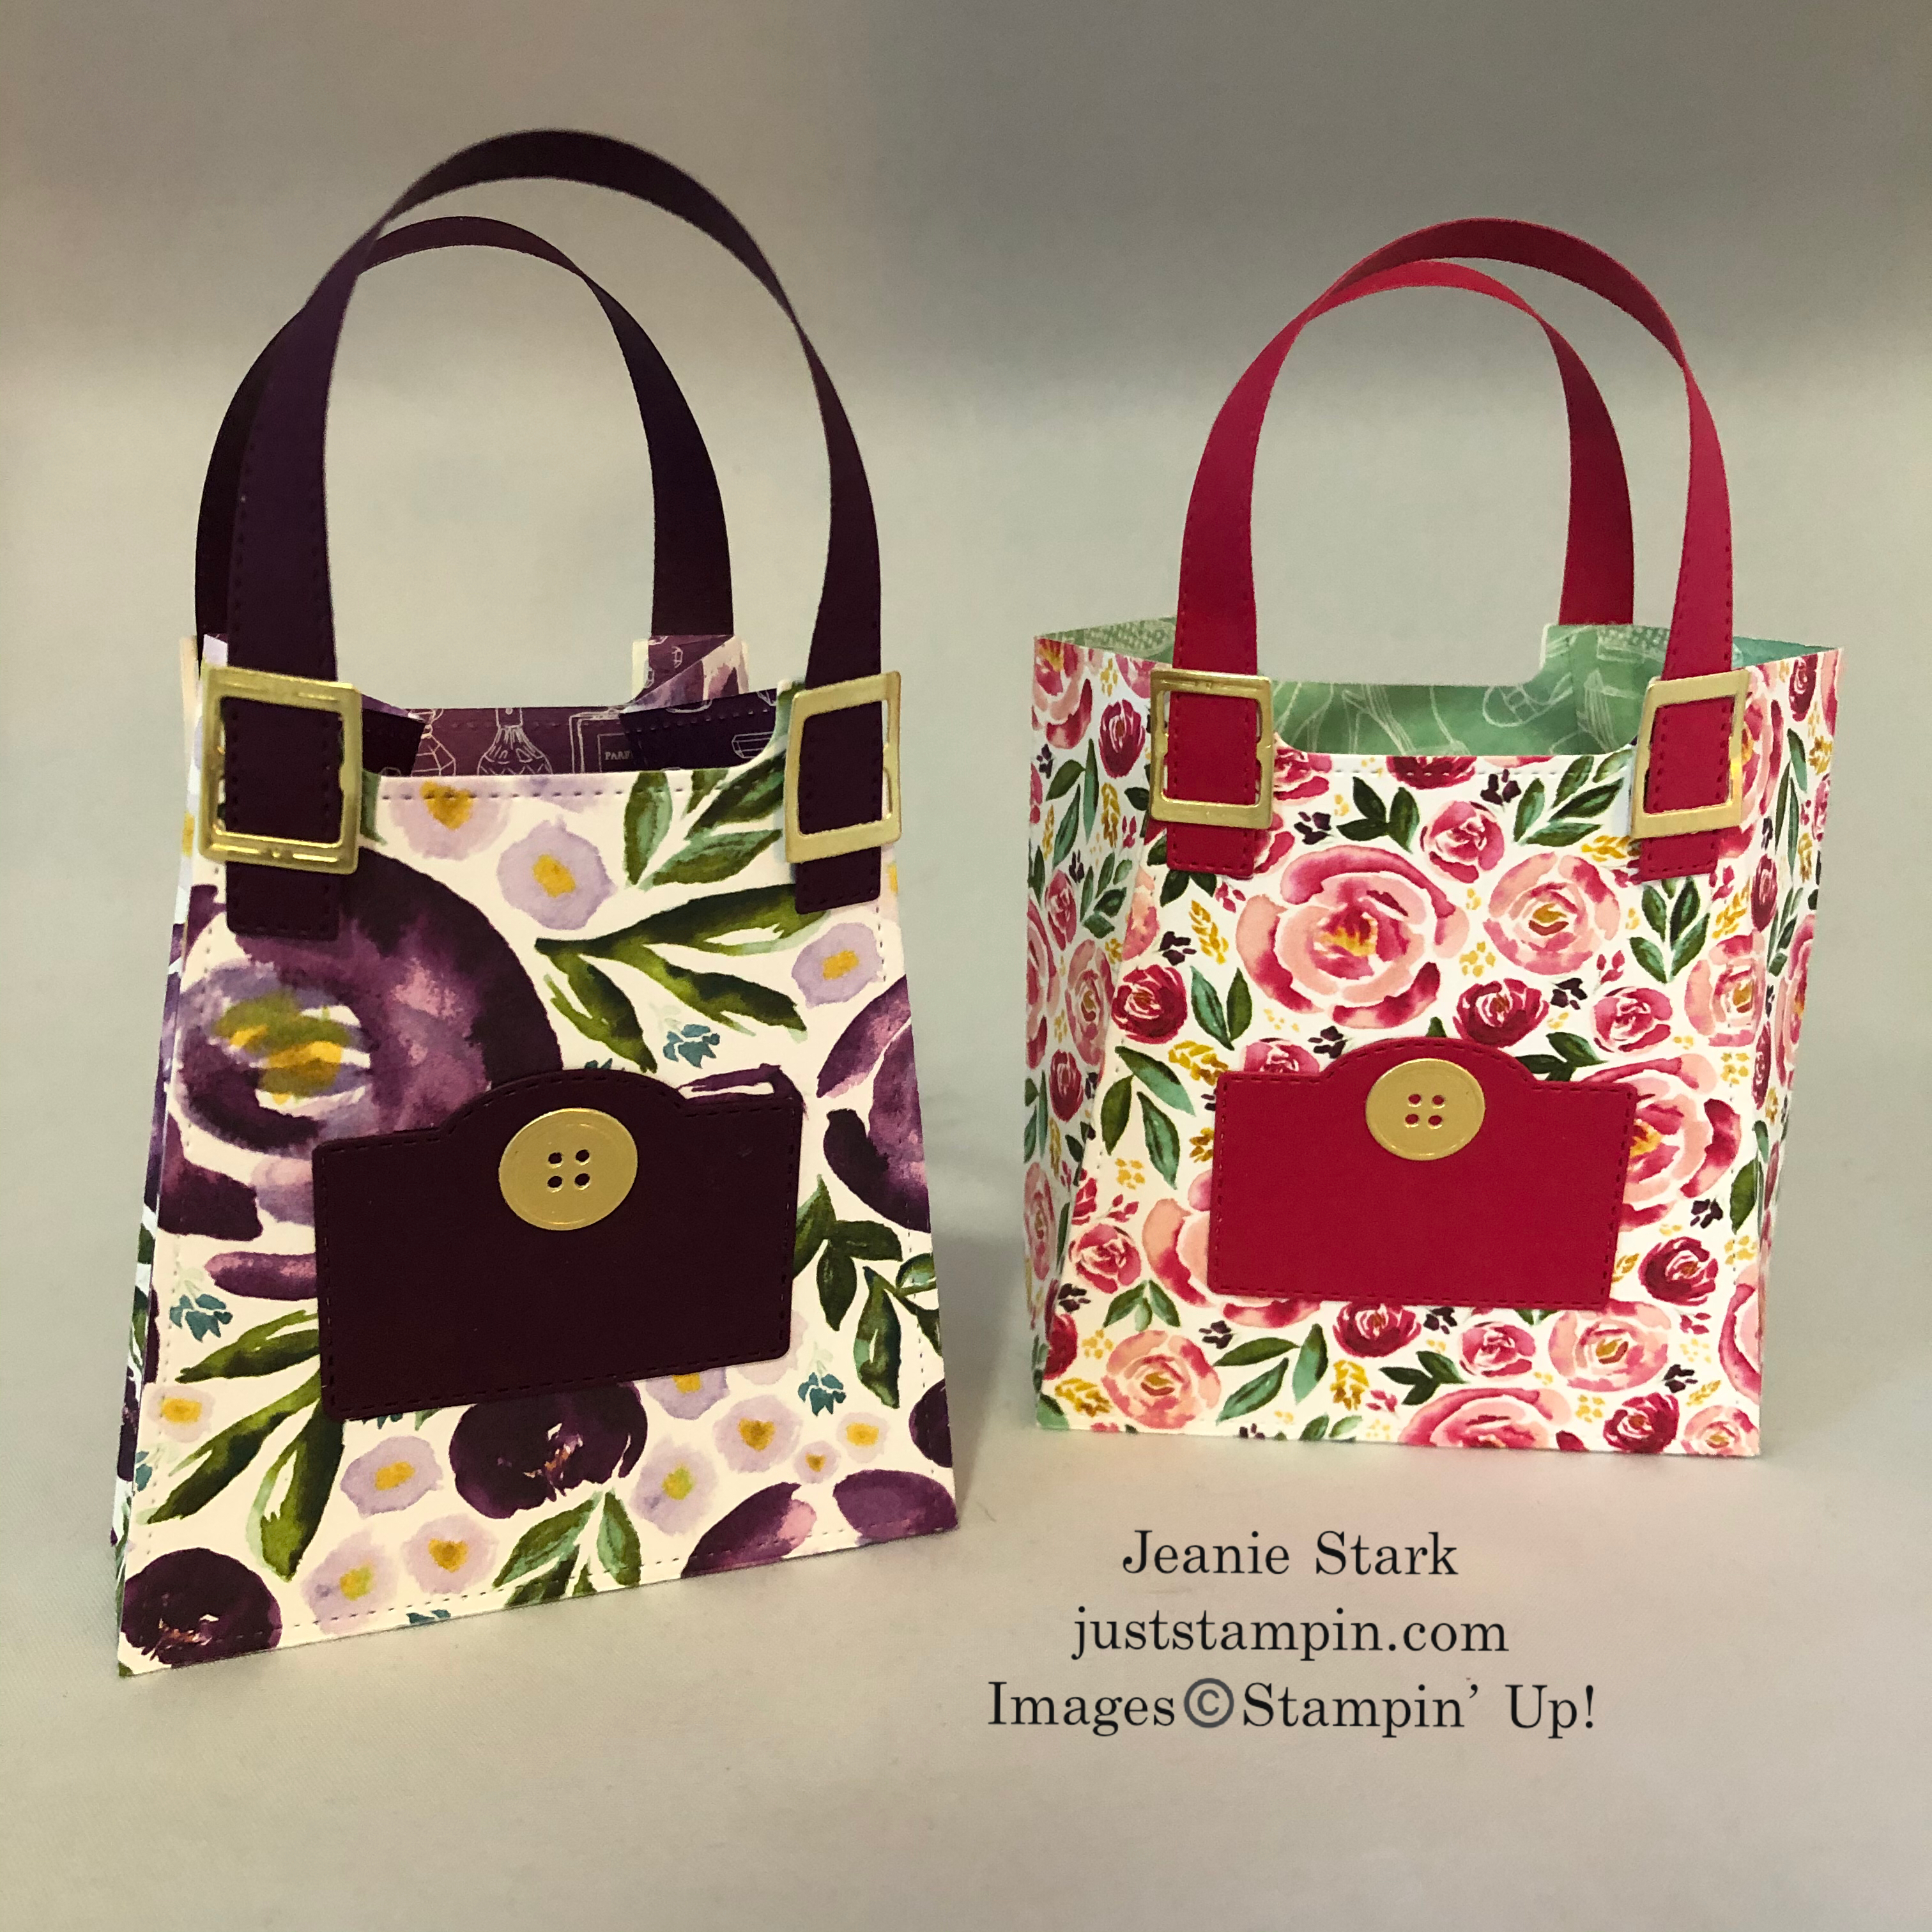 Stampin' Up! All Dressed Up purses for Mother's Day, birthday, wedding shower gifts - Jeanie Stark StampinUp